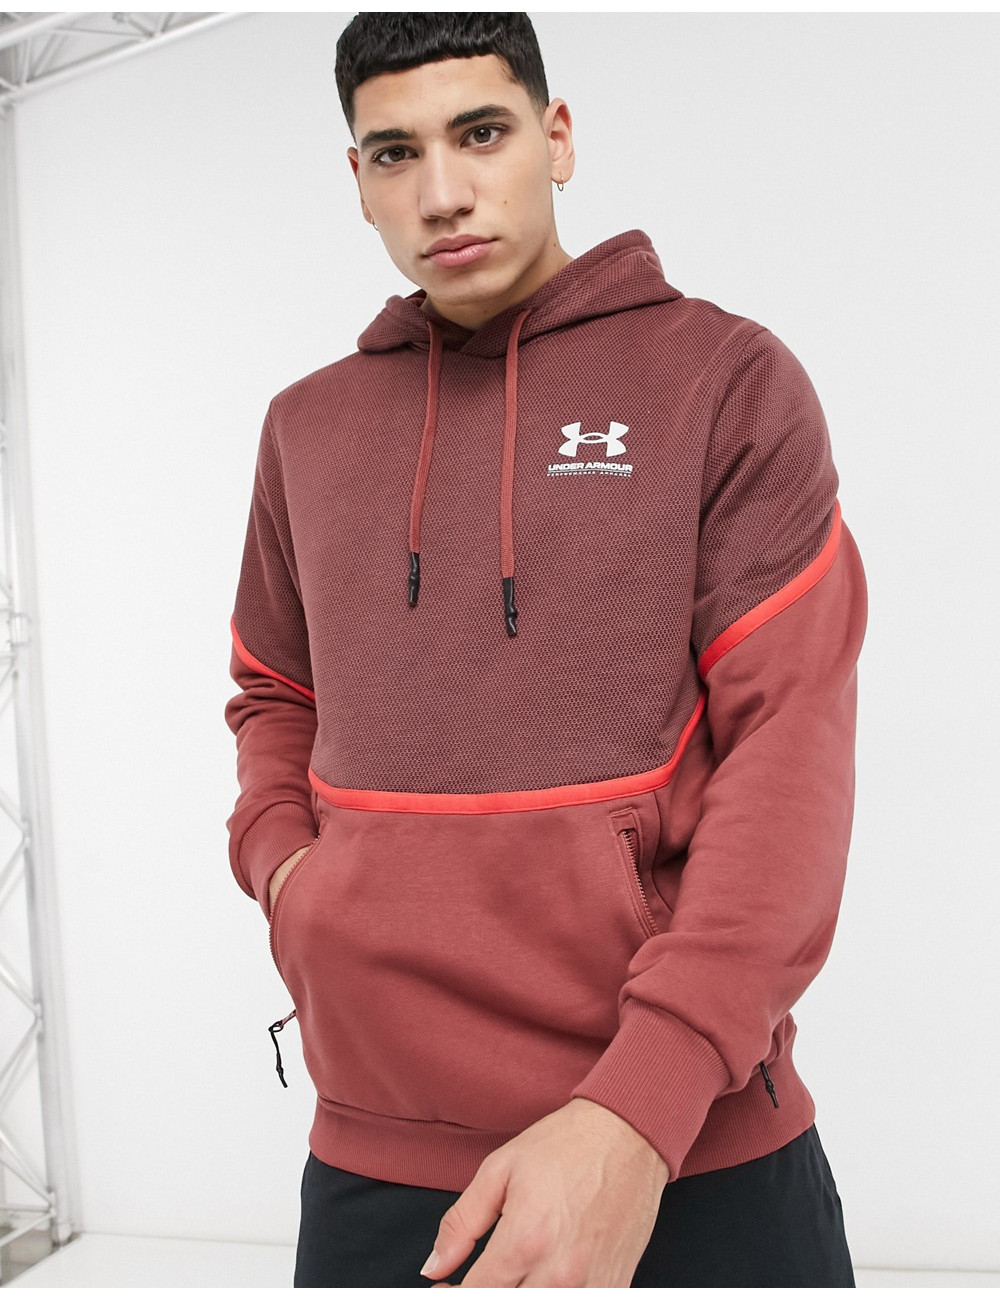 Under Armour hoodie in red